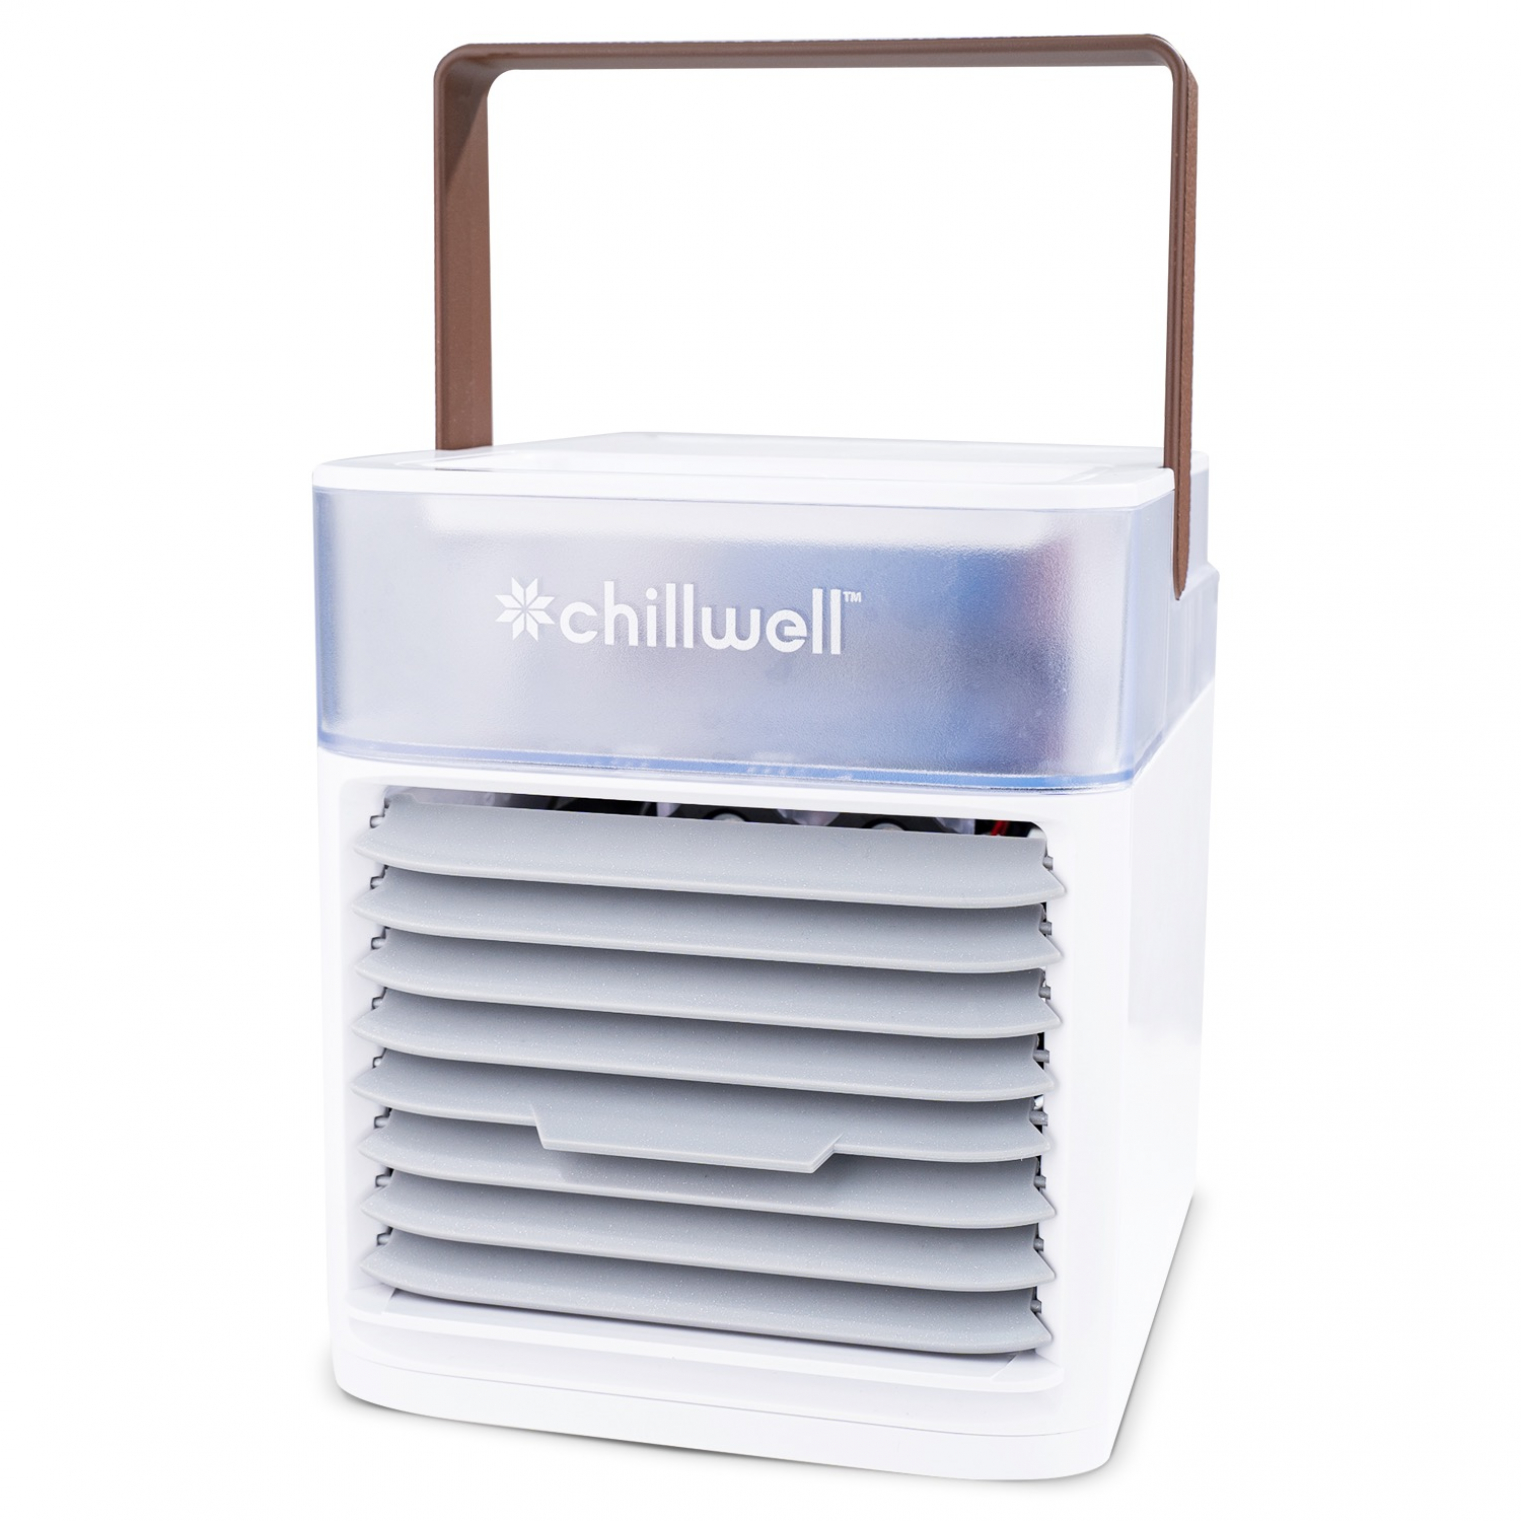 Chillwell AC Portable Air Conditioner Where To Buy